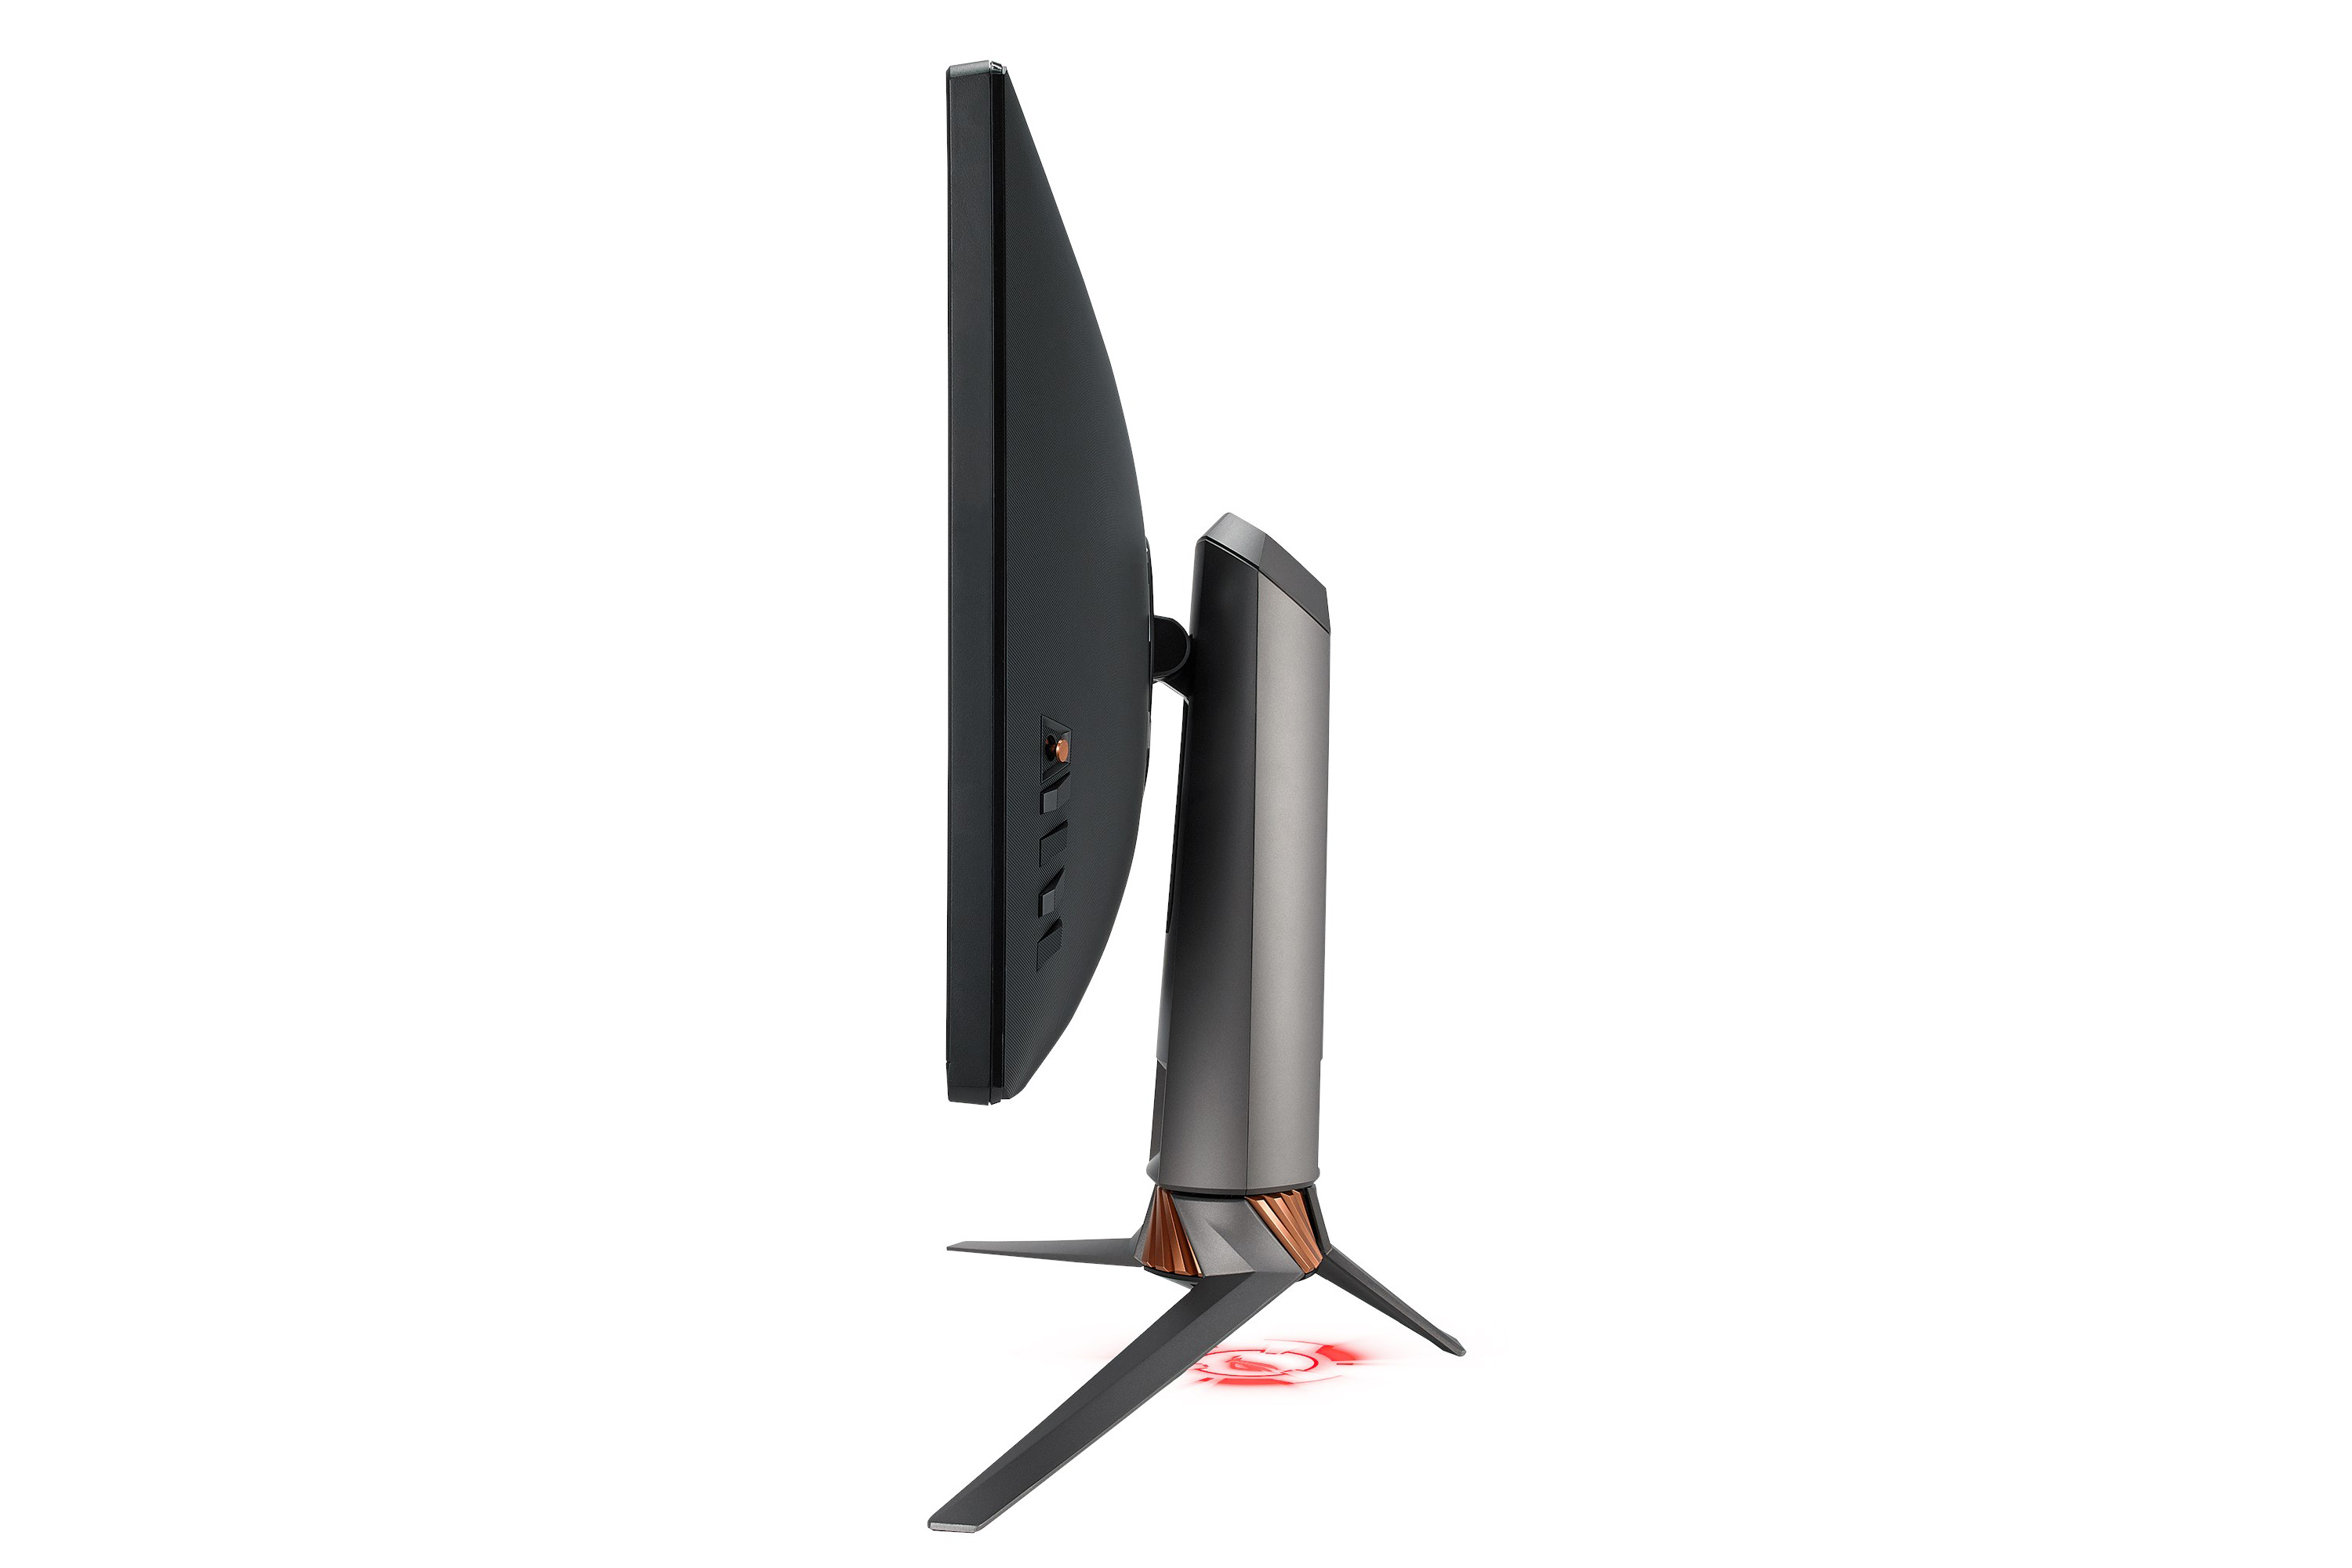 Asus ROG Swift PG27UQ 27 Review: 4K 144Hz HDR is Finally Here